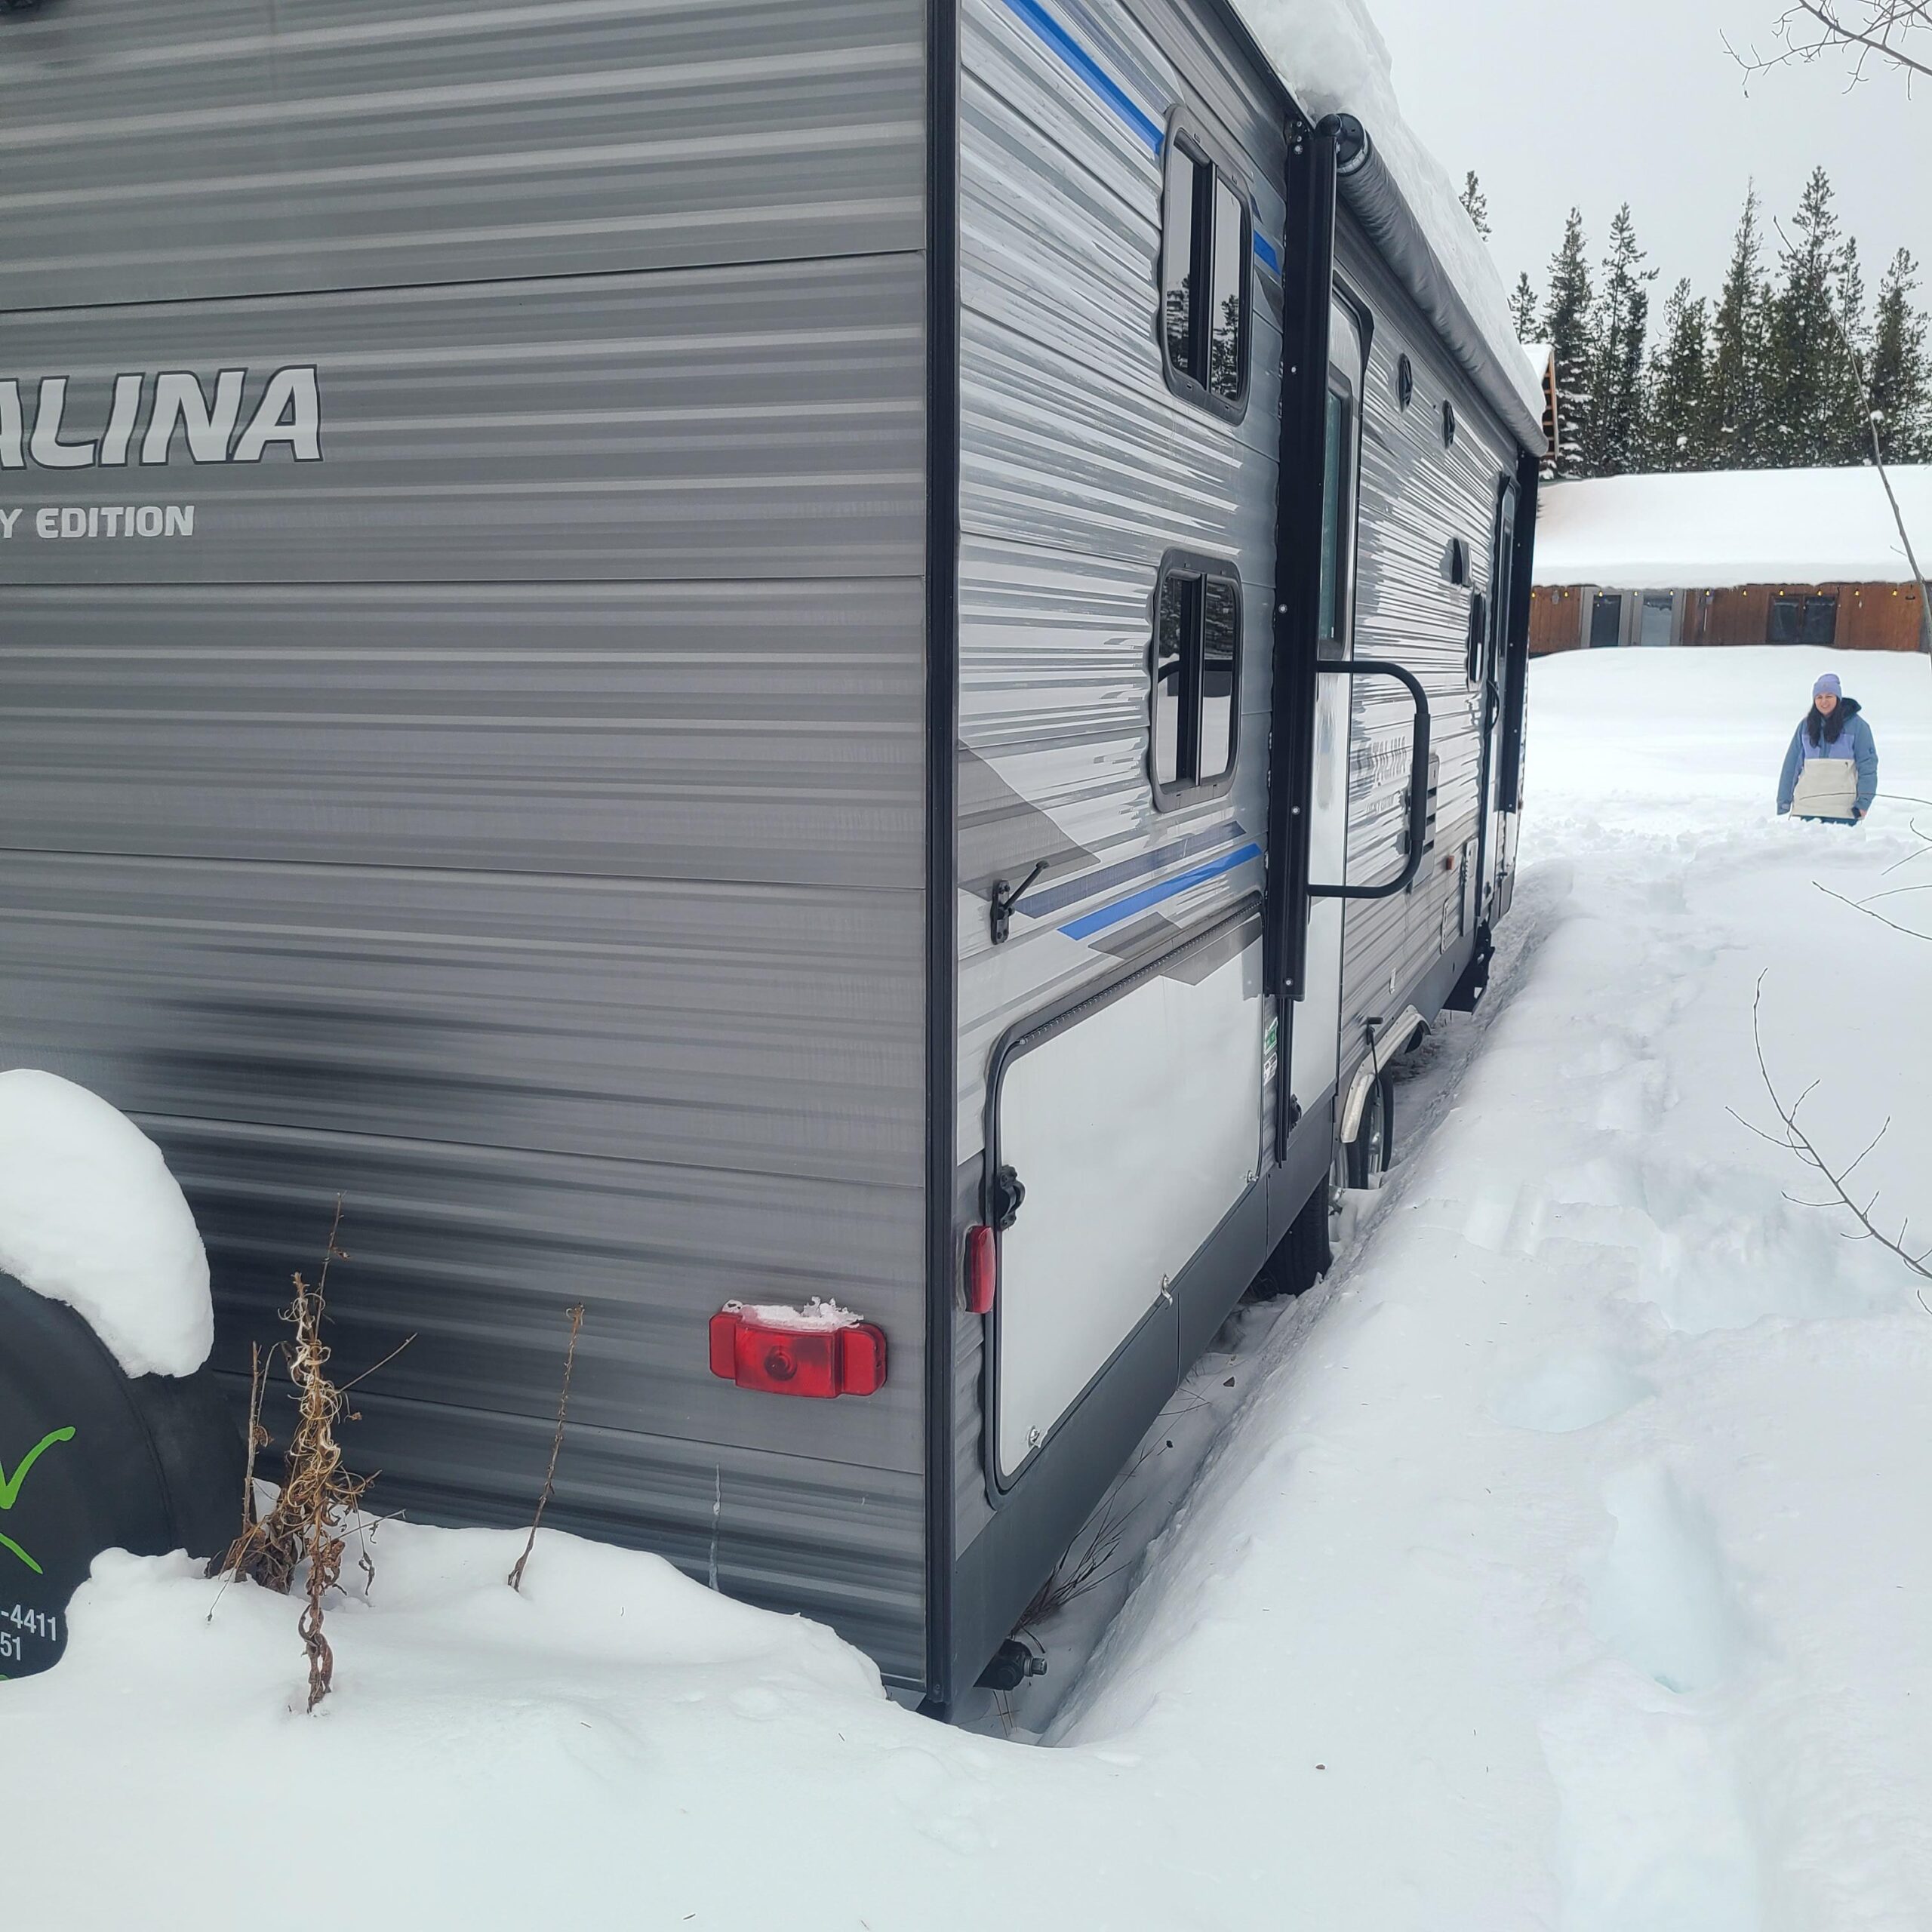 2019 Coachman Catalina 273BHSKS #B-PG-0749 Located in Prince George